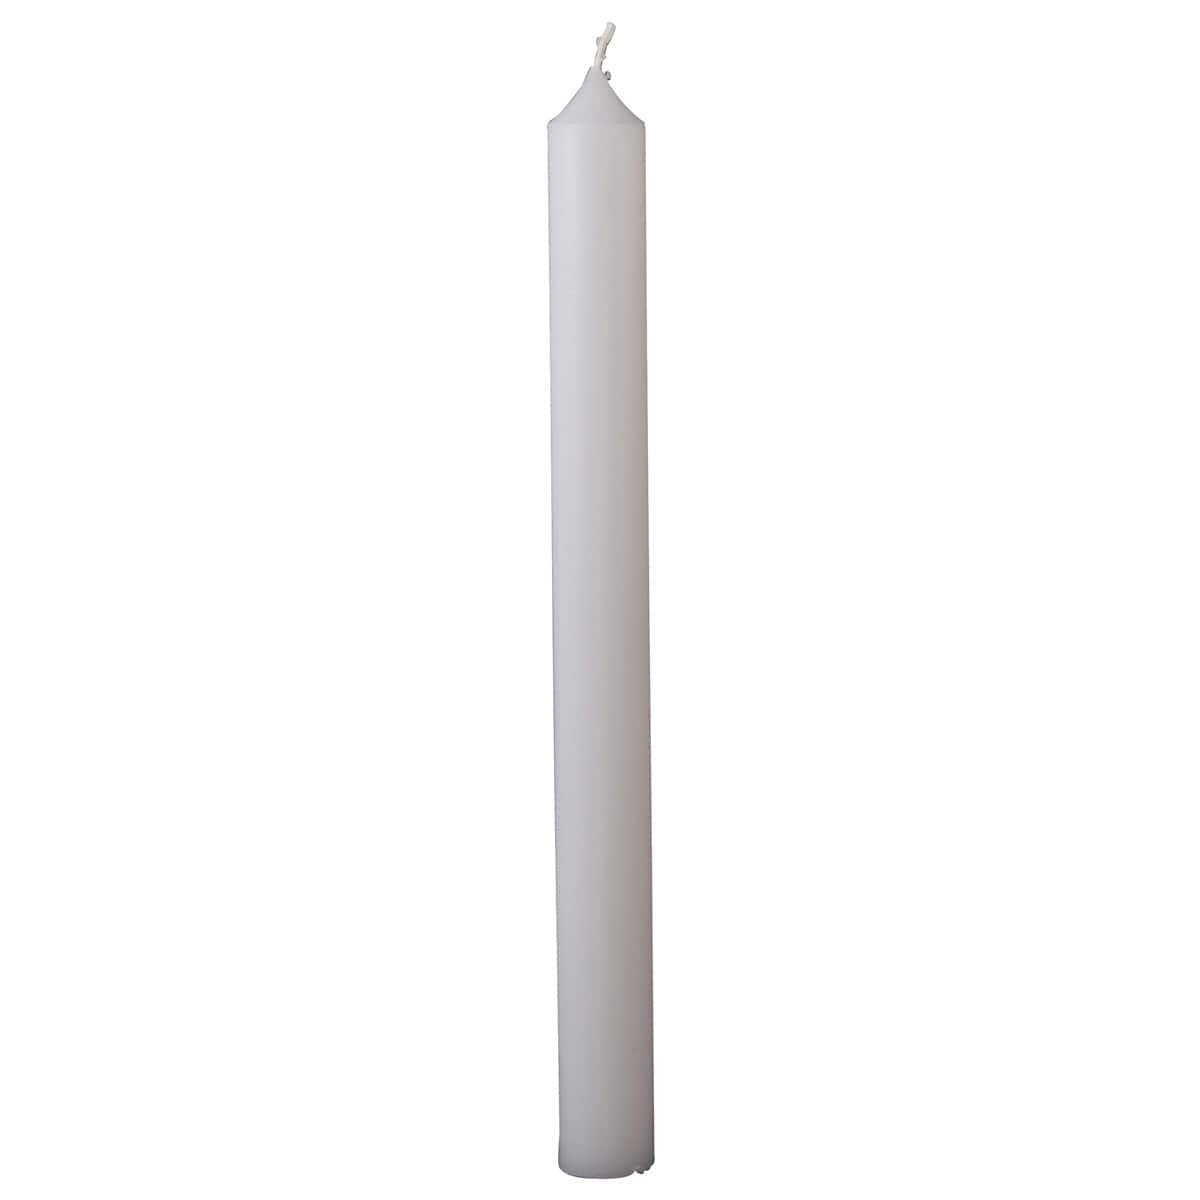 Ashland® Taper Candles Party Pack